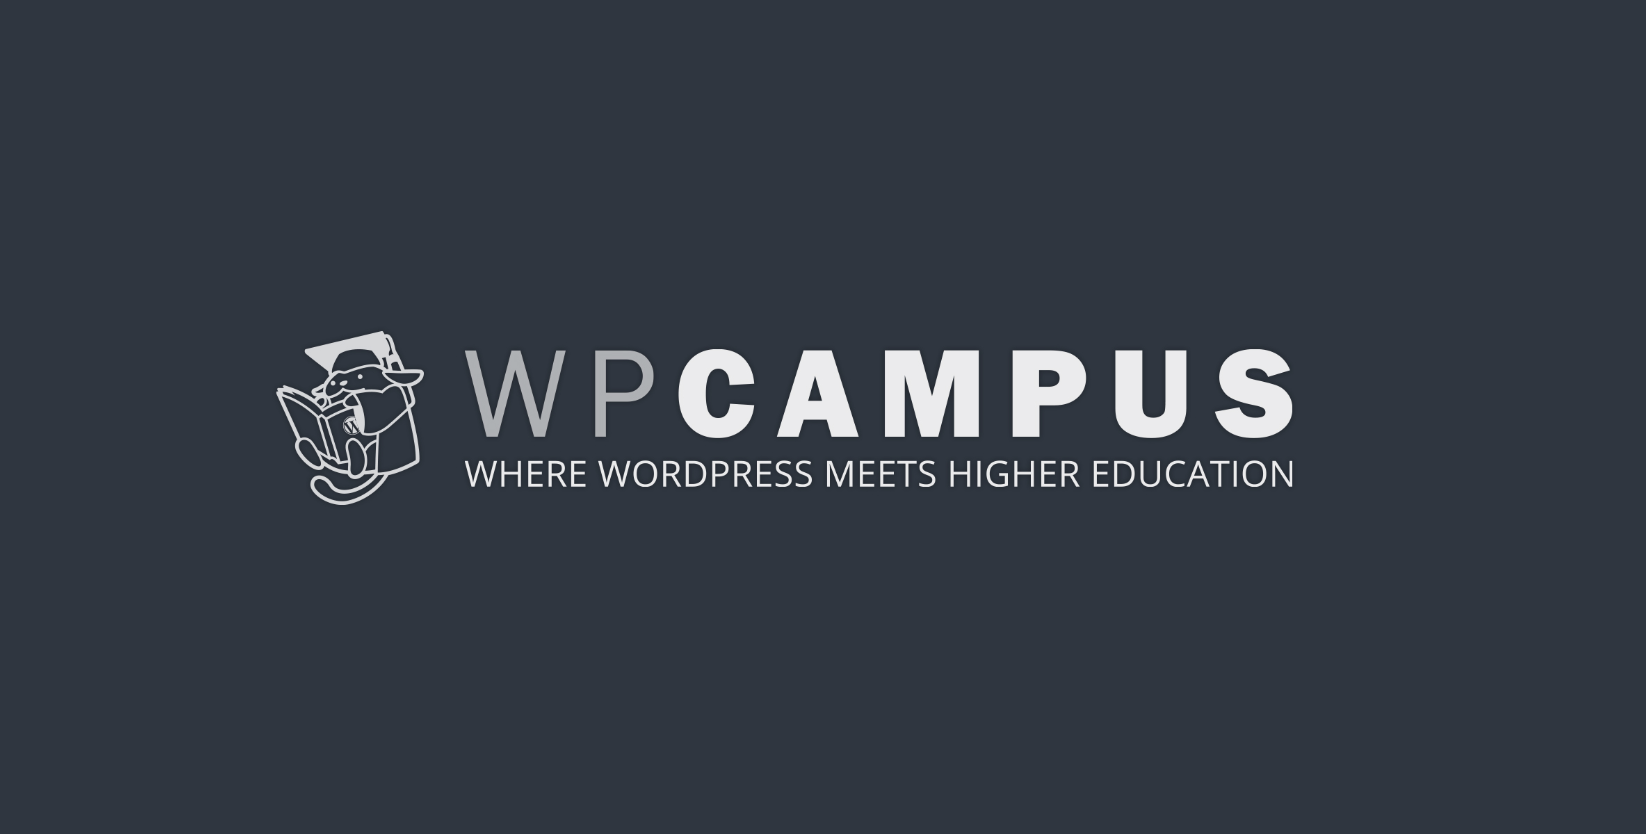 wpcampus-online-2020-conference-features-accessibility-and-higher-education-topics-july-29-30 WPCampus Online 2020 Conference特色可訪問性和高等教育主題，7月29-30日